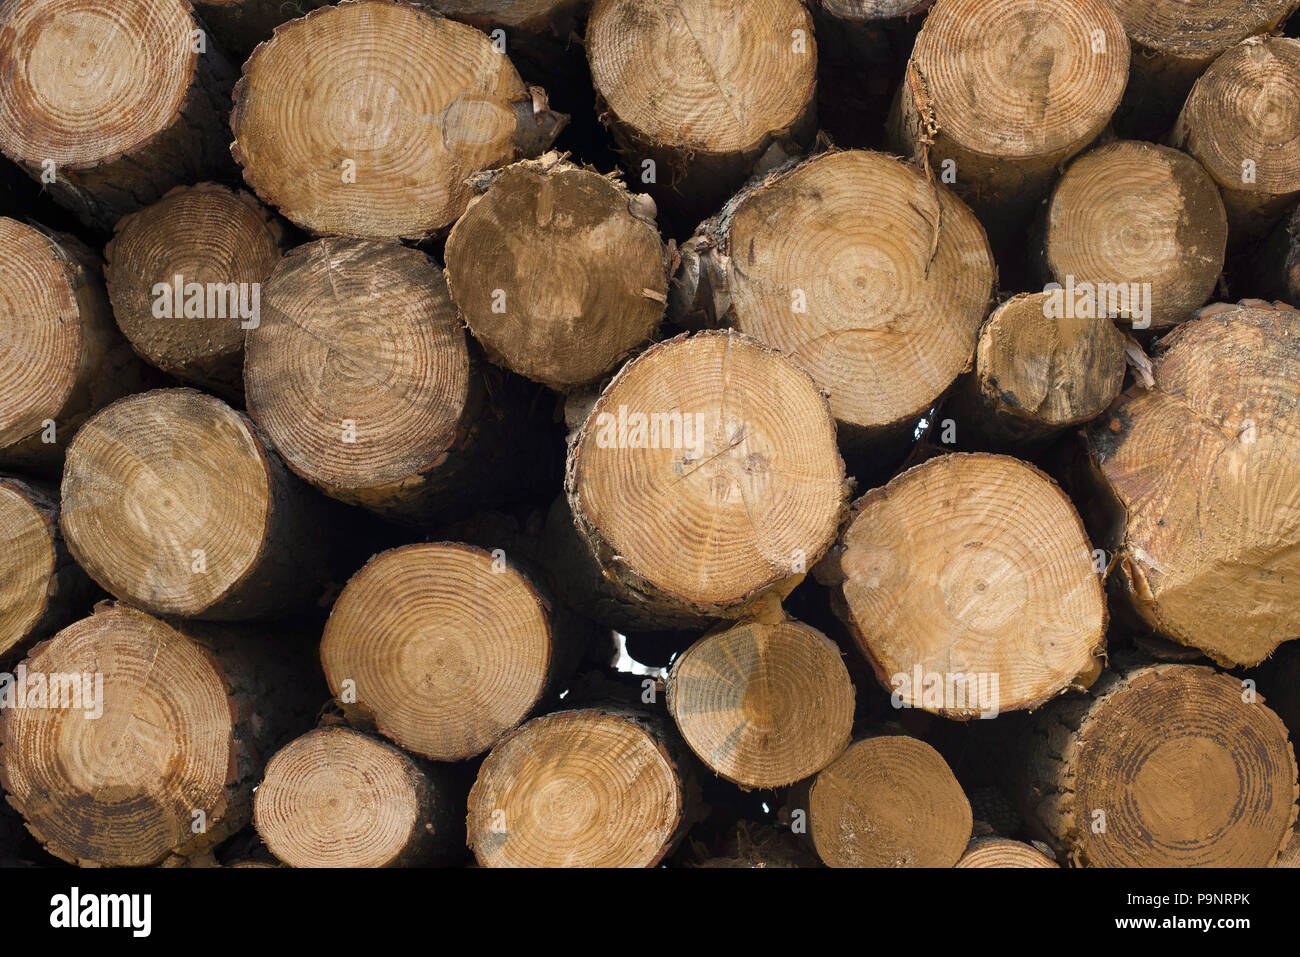 Wood log pile, timber stack texture background. Wooden tree trunks cut for lumber industry. Stock Photo